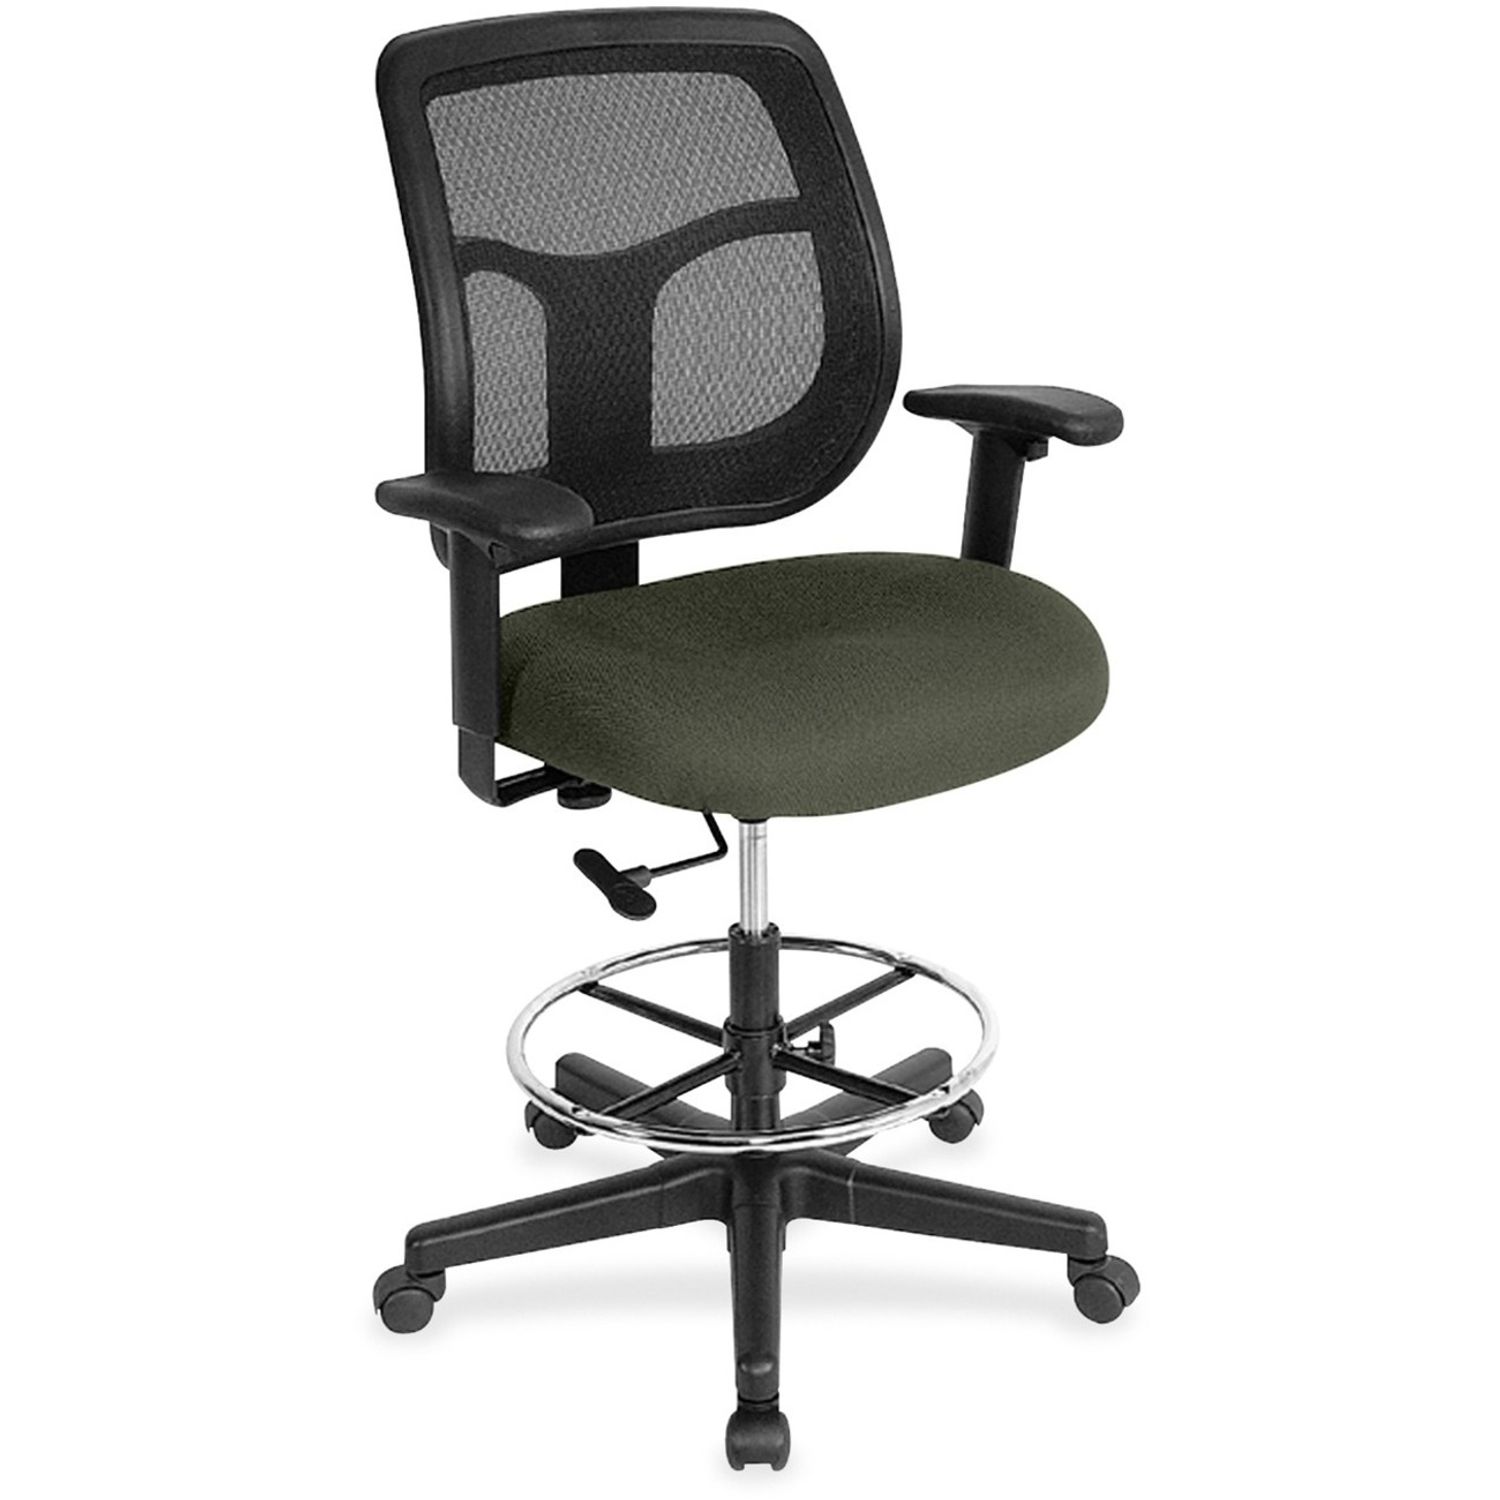 Apollo DFT9800 Drafting Stool Olive Green Fabric Seat, 5-star Base, 1 Each